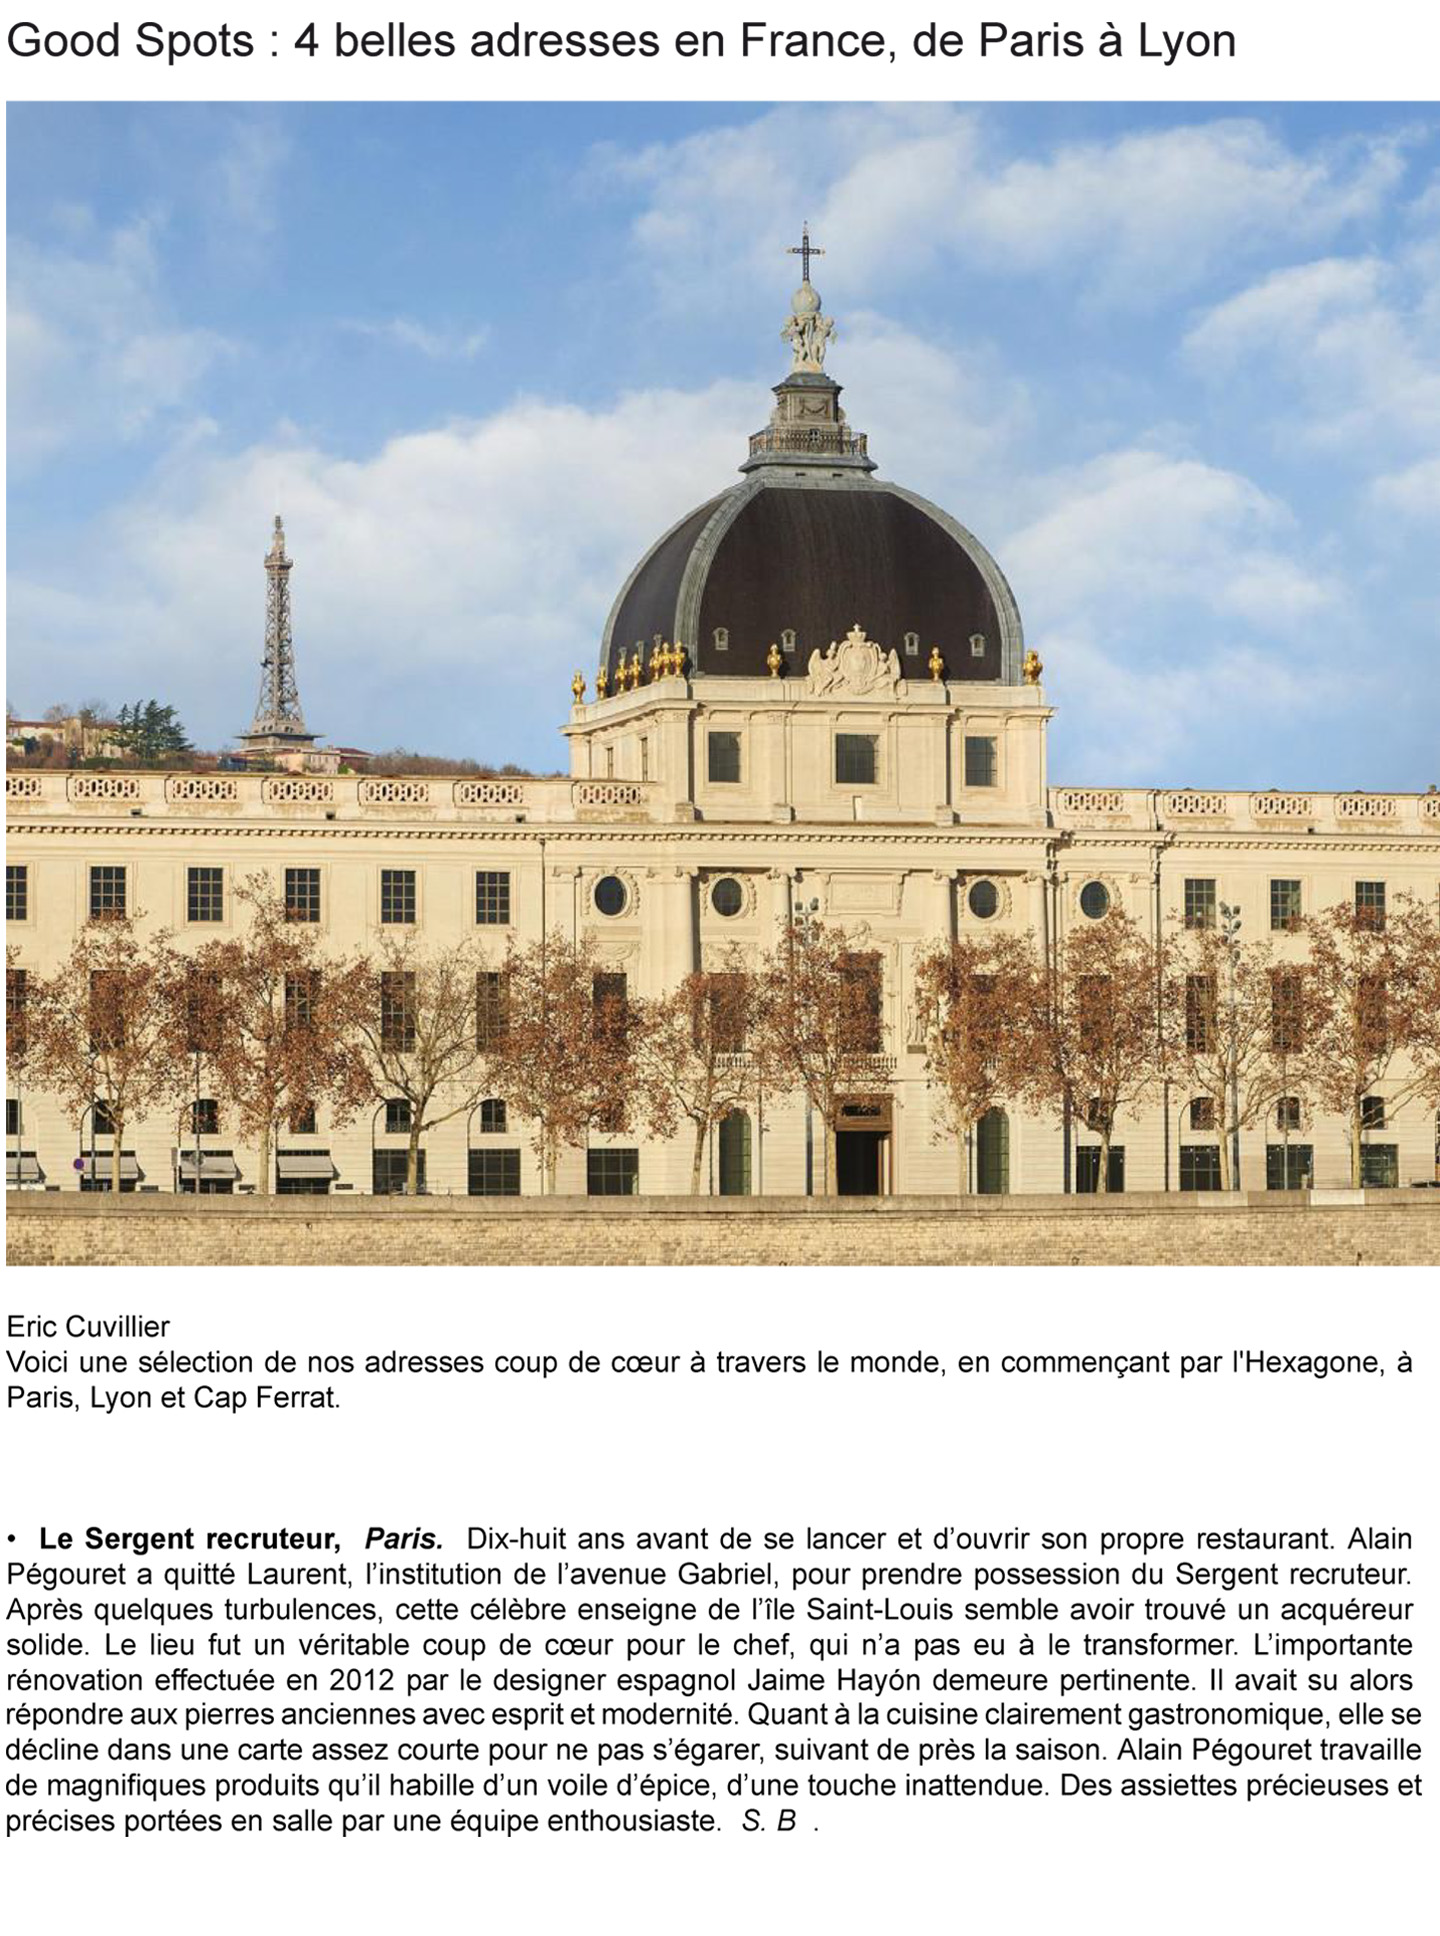 Article on the InterContinental Lyon Hotel Dieu realized by the studio jean-Philippe Nuel in the magazine The Good life, new luxury hotel, luxury interior design, historical heritage